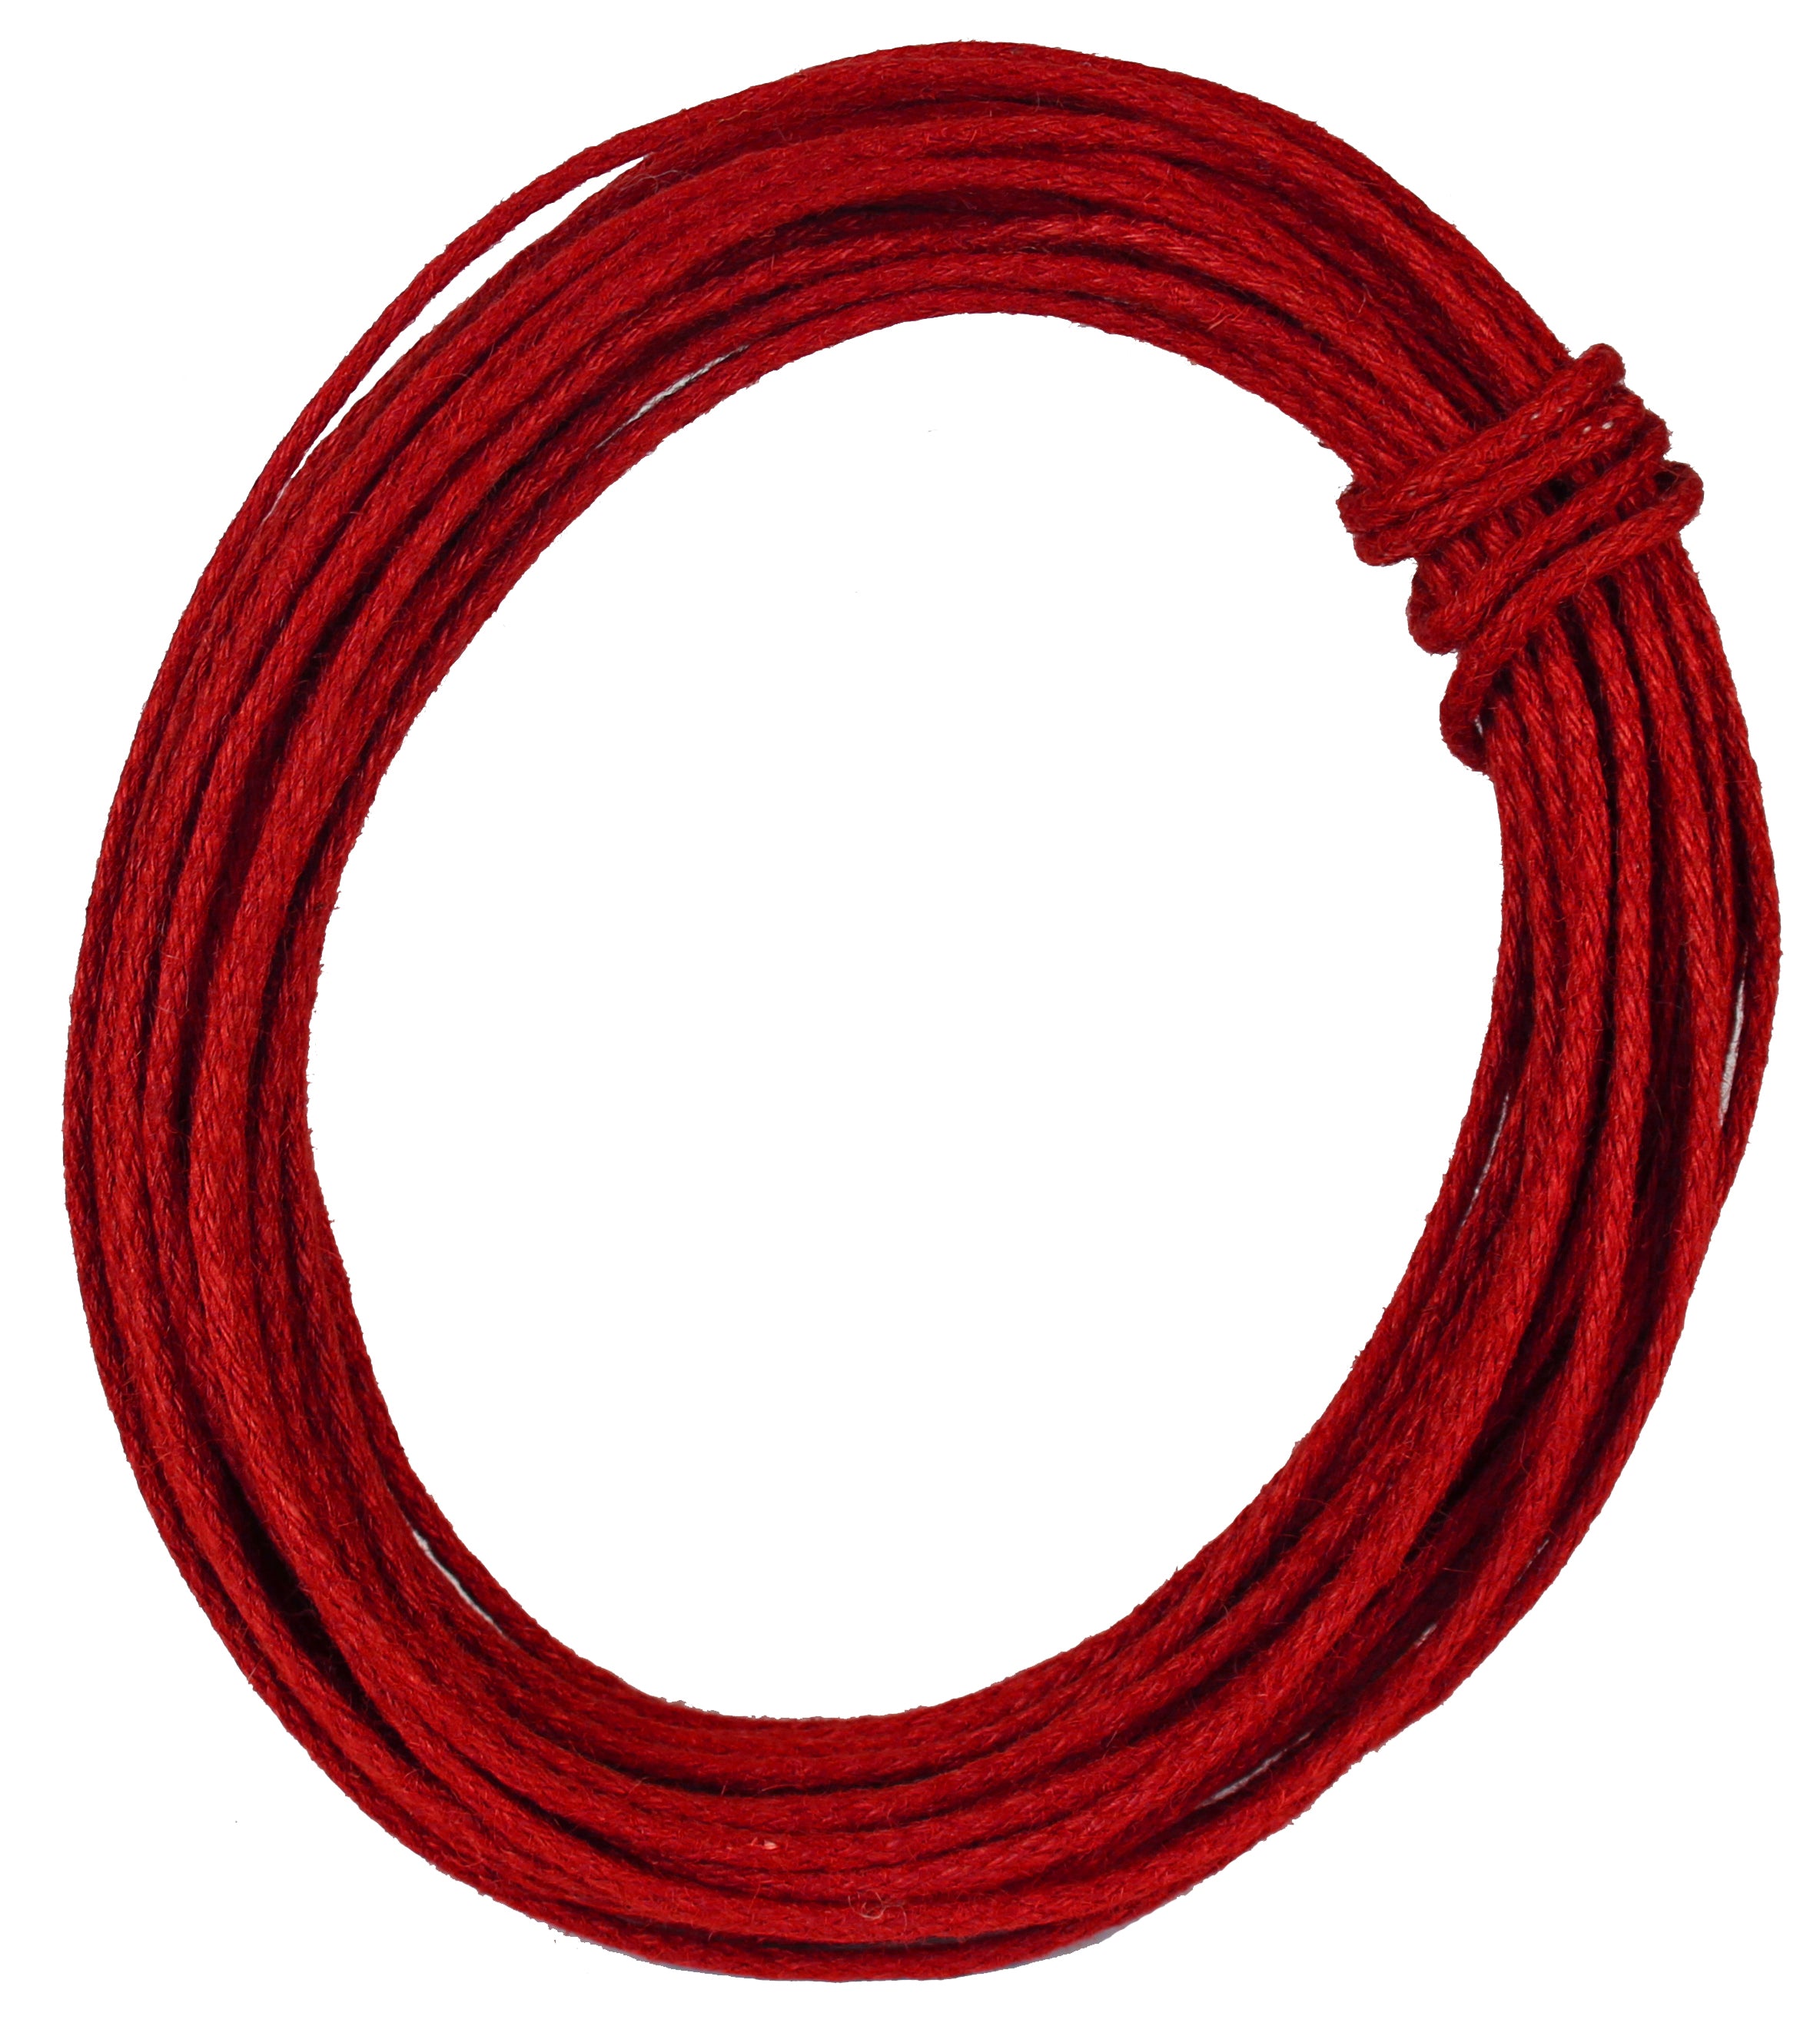 Wired Jute Rope: Red